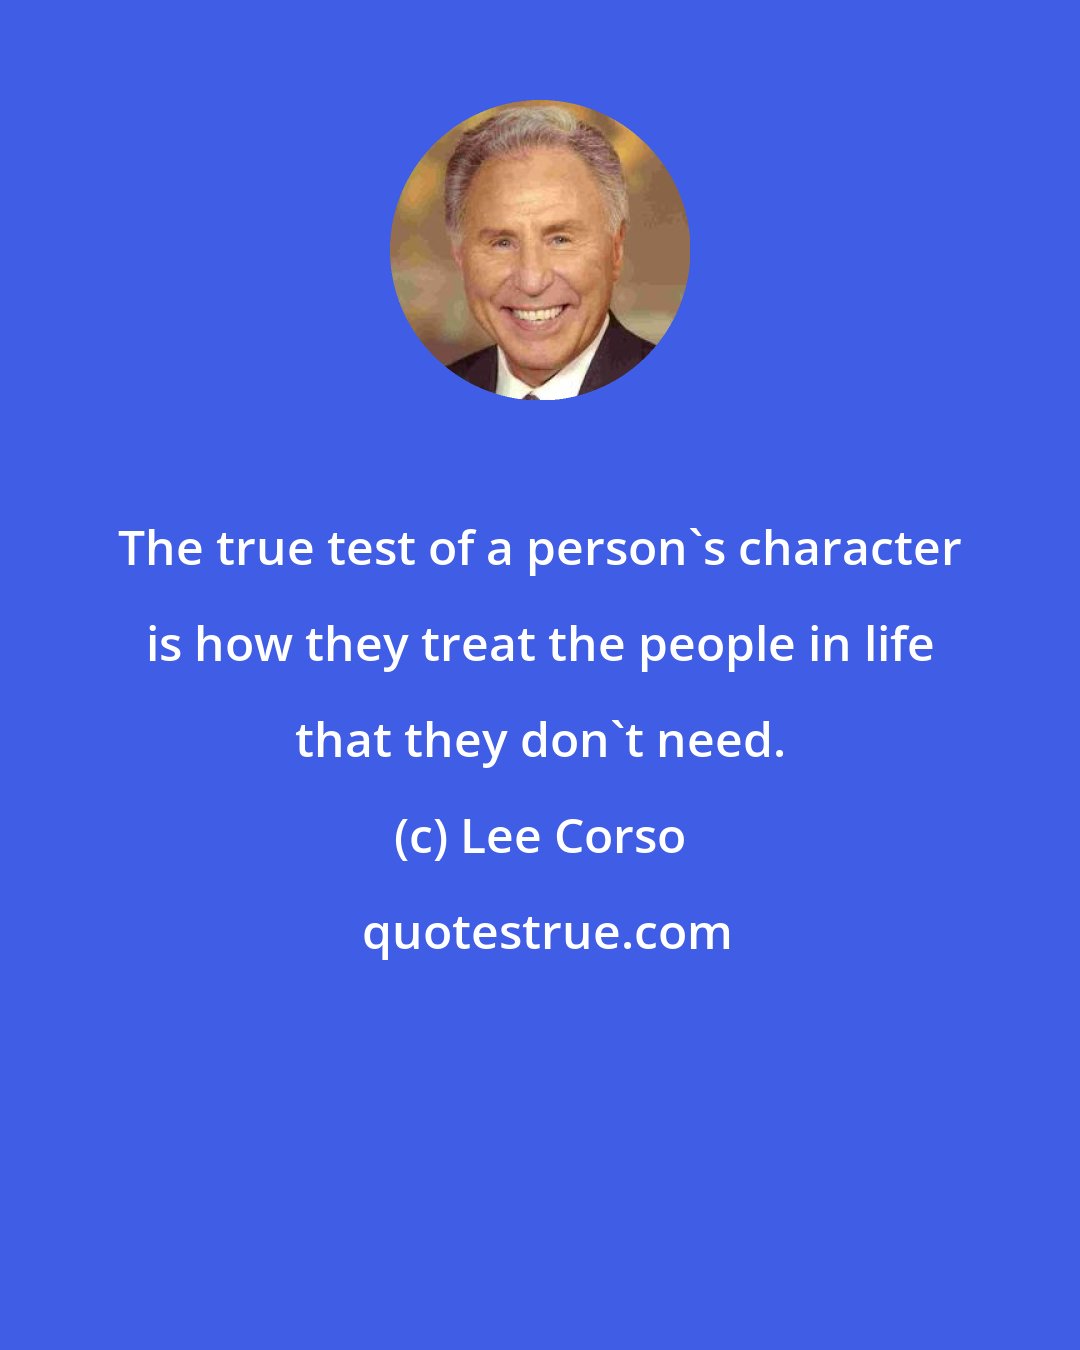 Lee Corso: The true test of a person's character is how they treat the people in life that they don't need.